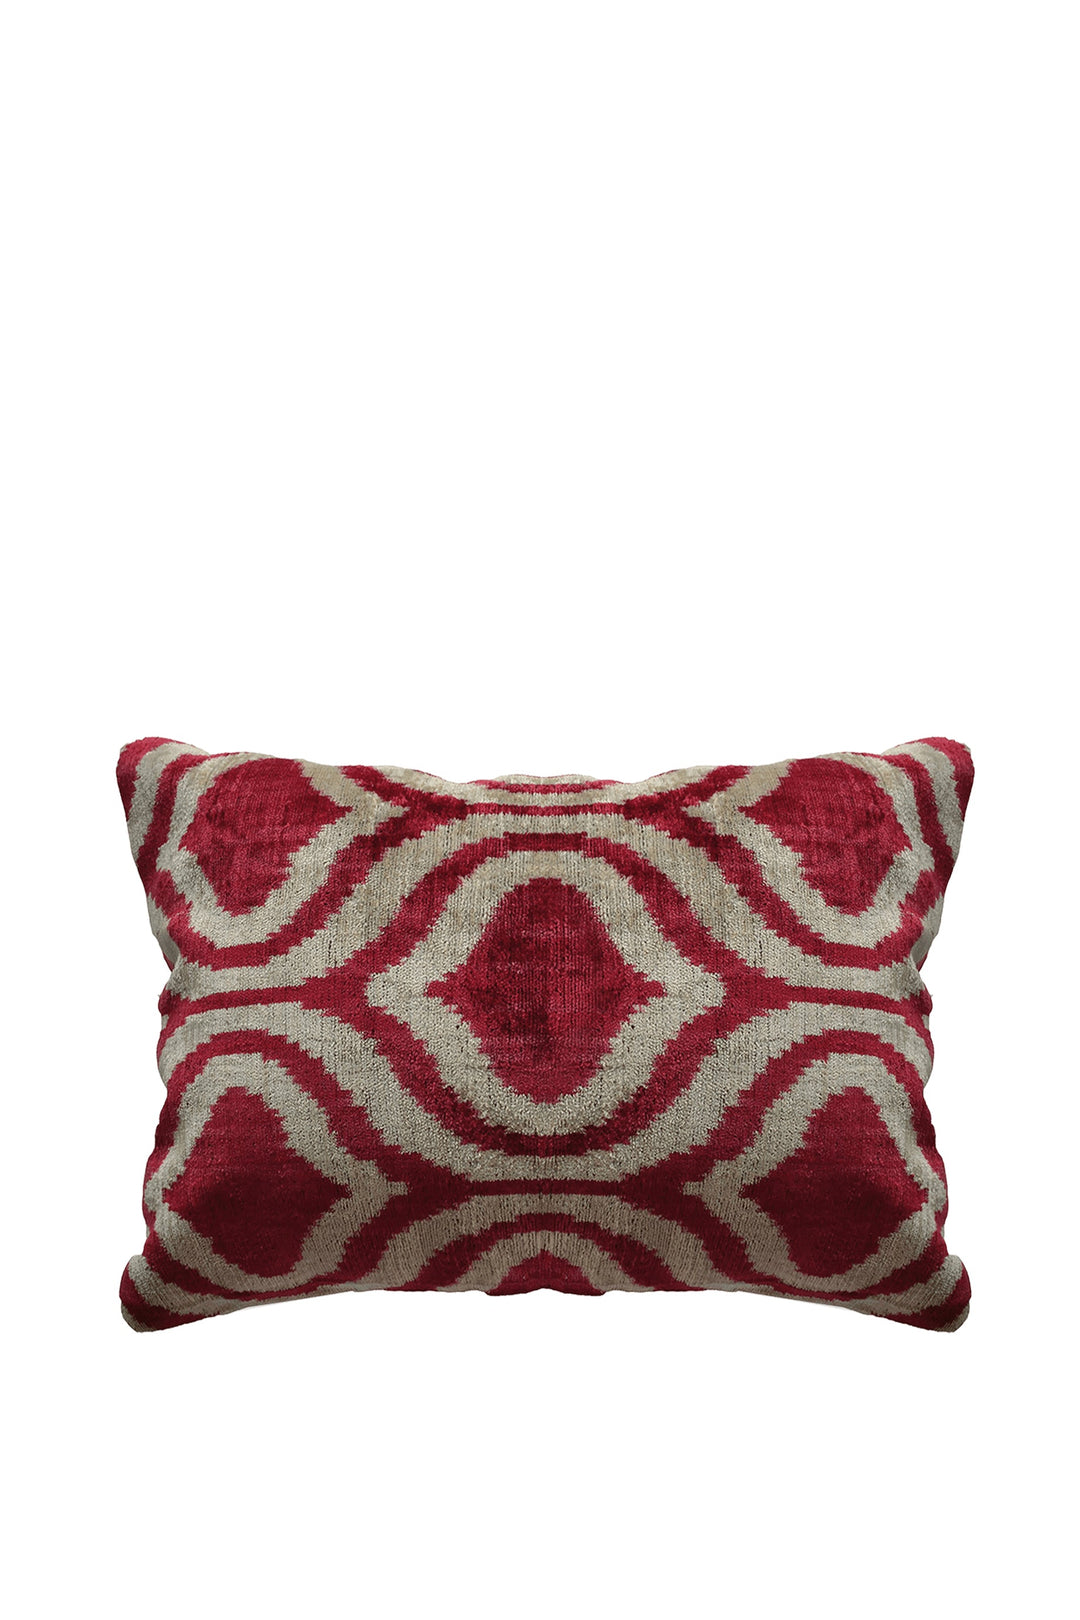 Les Ottomans Double Cushion - Red